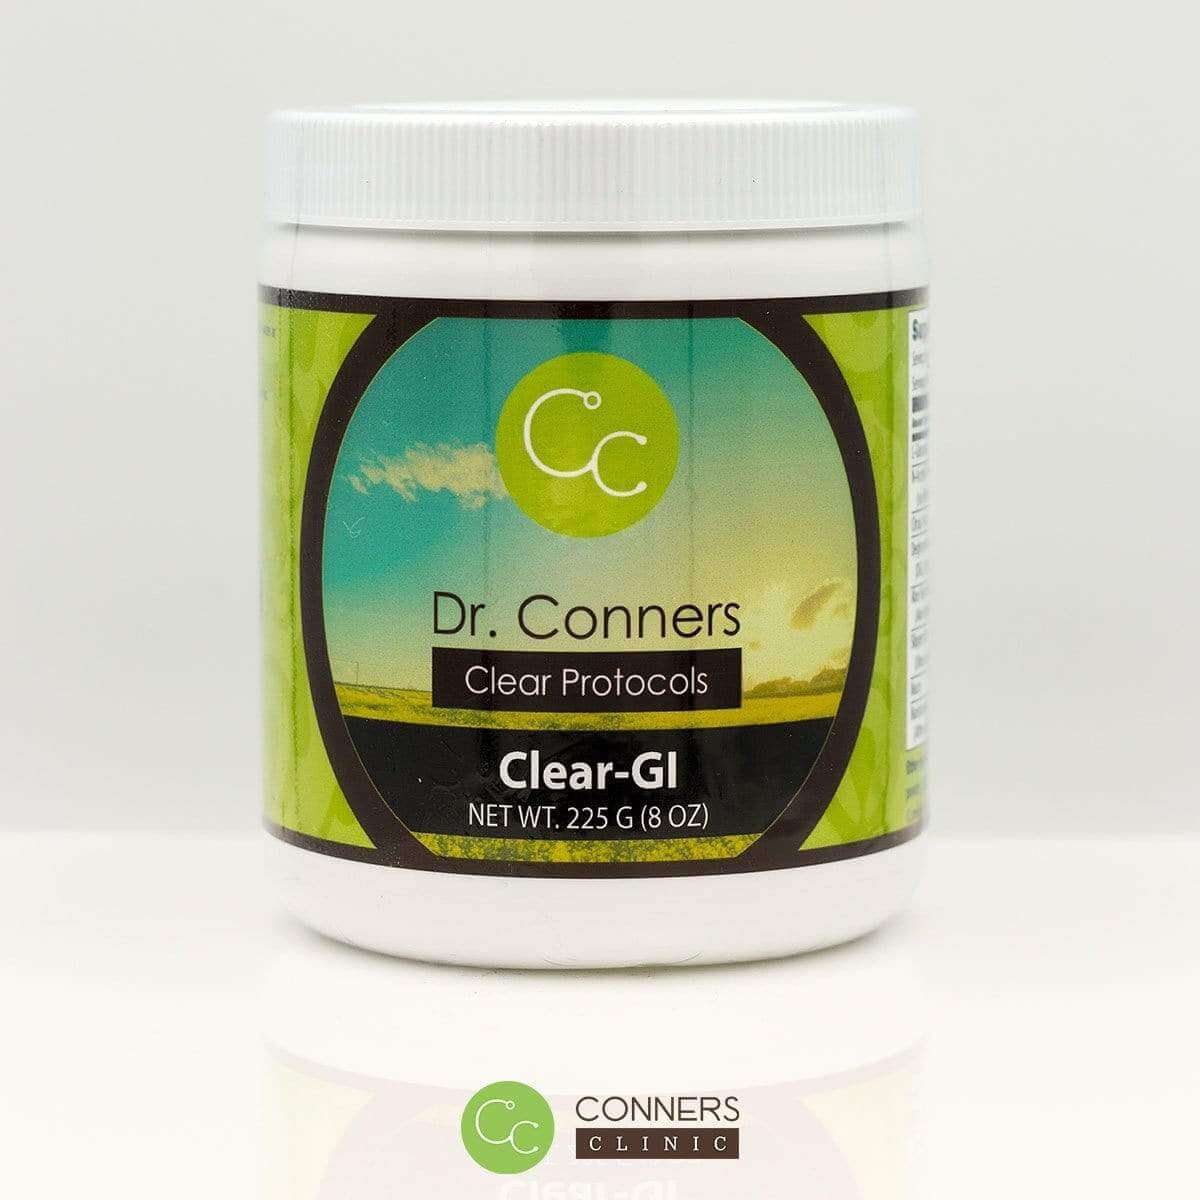 Gut Healing Bundle - Protocol #2 Conners Clinic Supplement - Conners Clinic